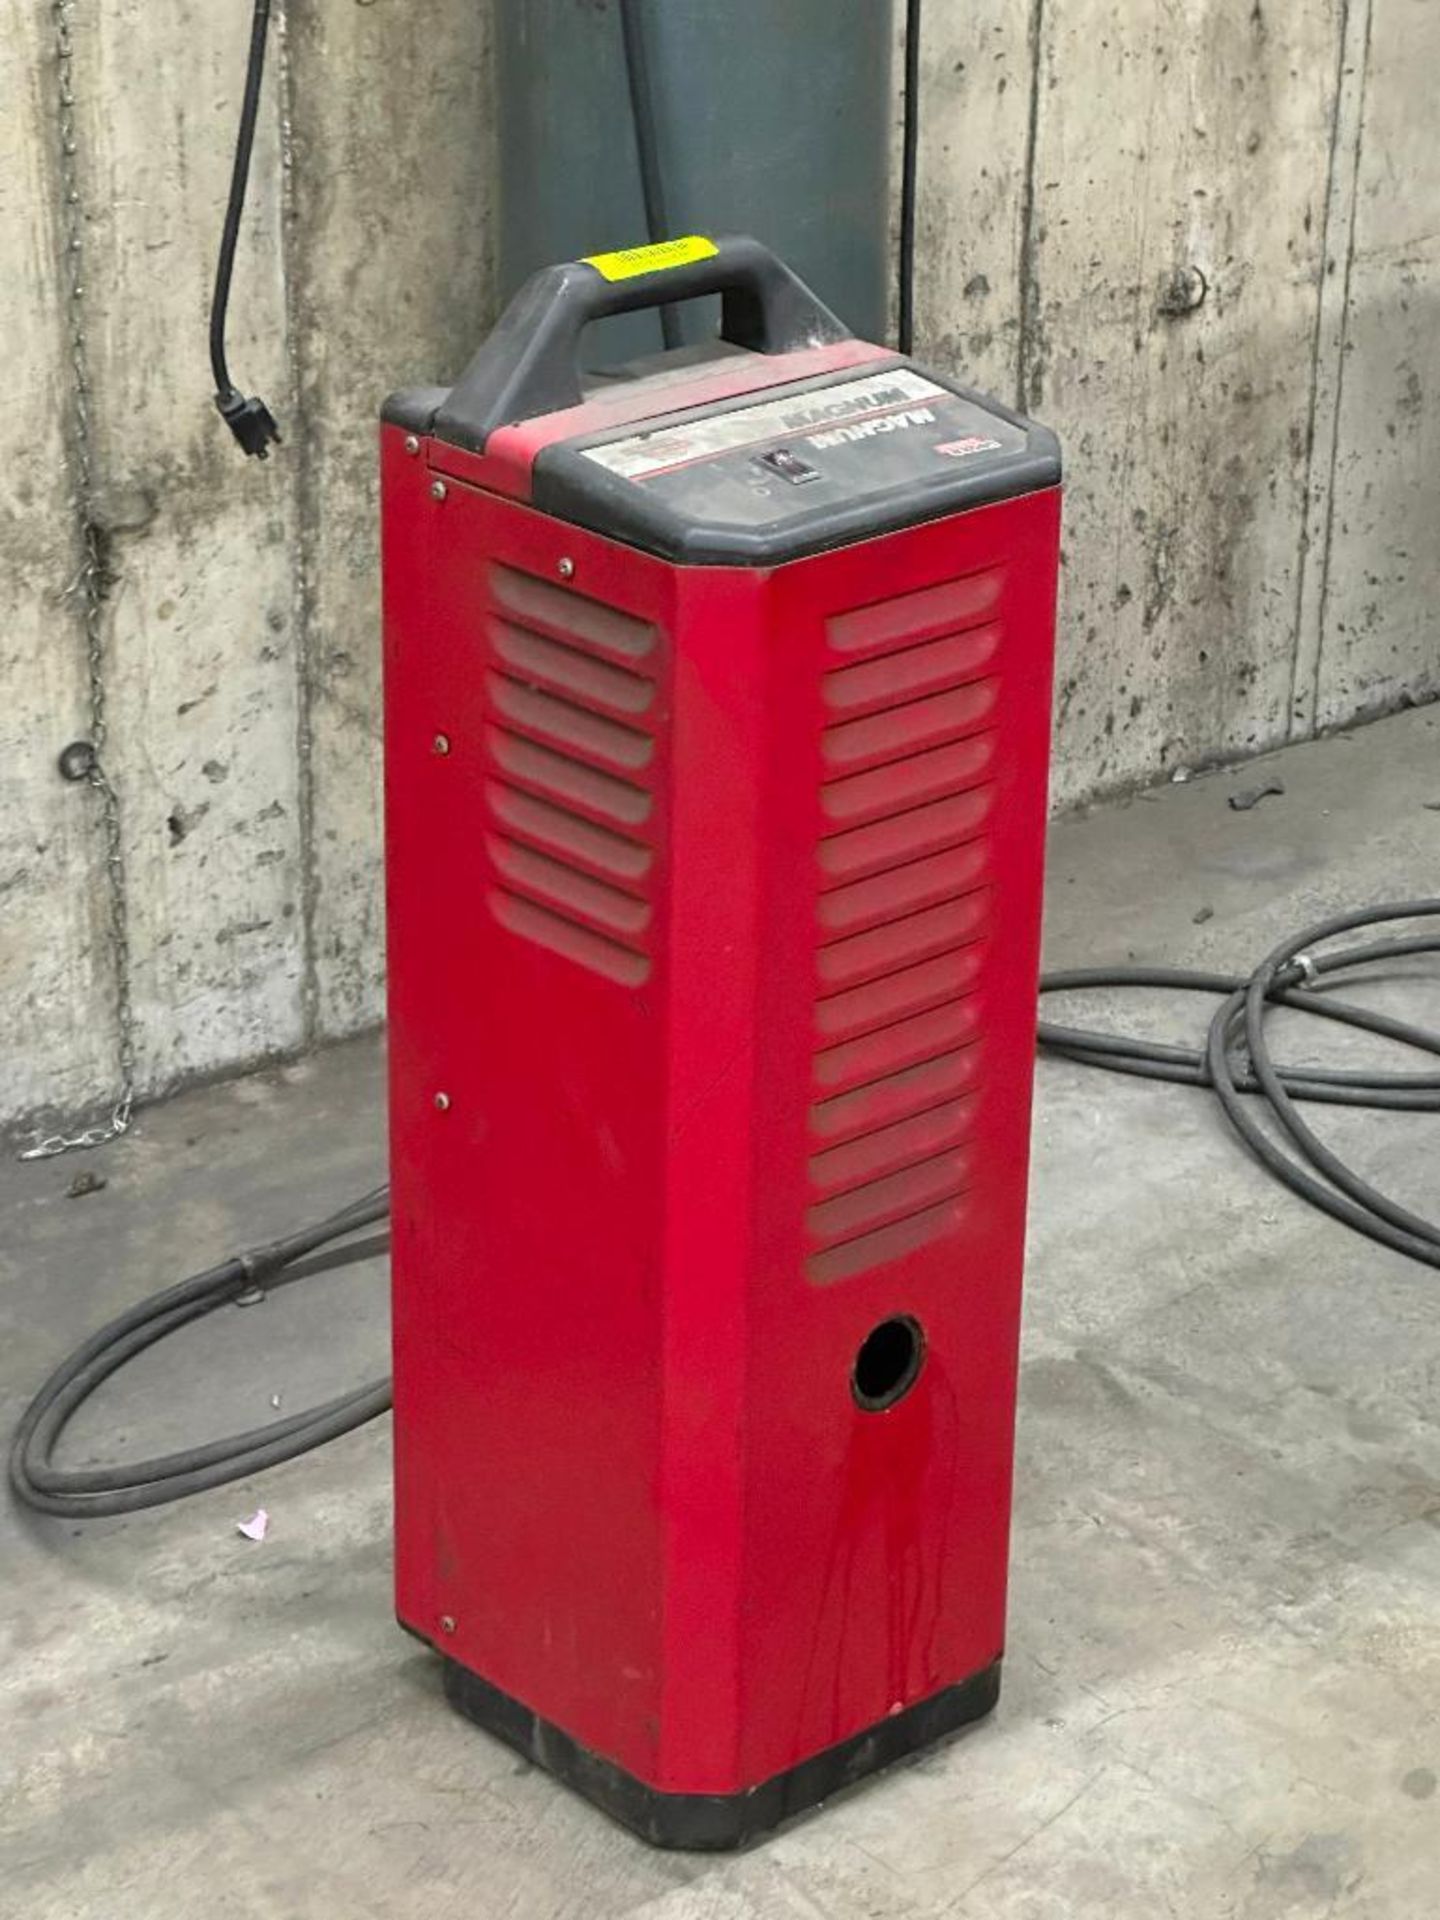 LINCOLN IDEALARC VARIABLE VOLTAGE ARC WELDER WITH LEADS AND ADDITIONAL FUEL TANK - Image 6 of 10